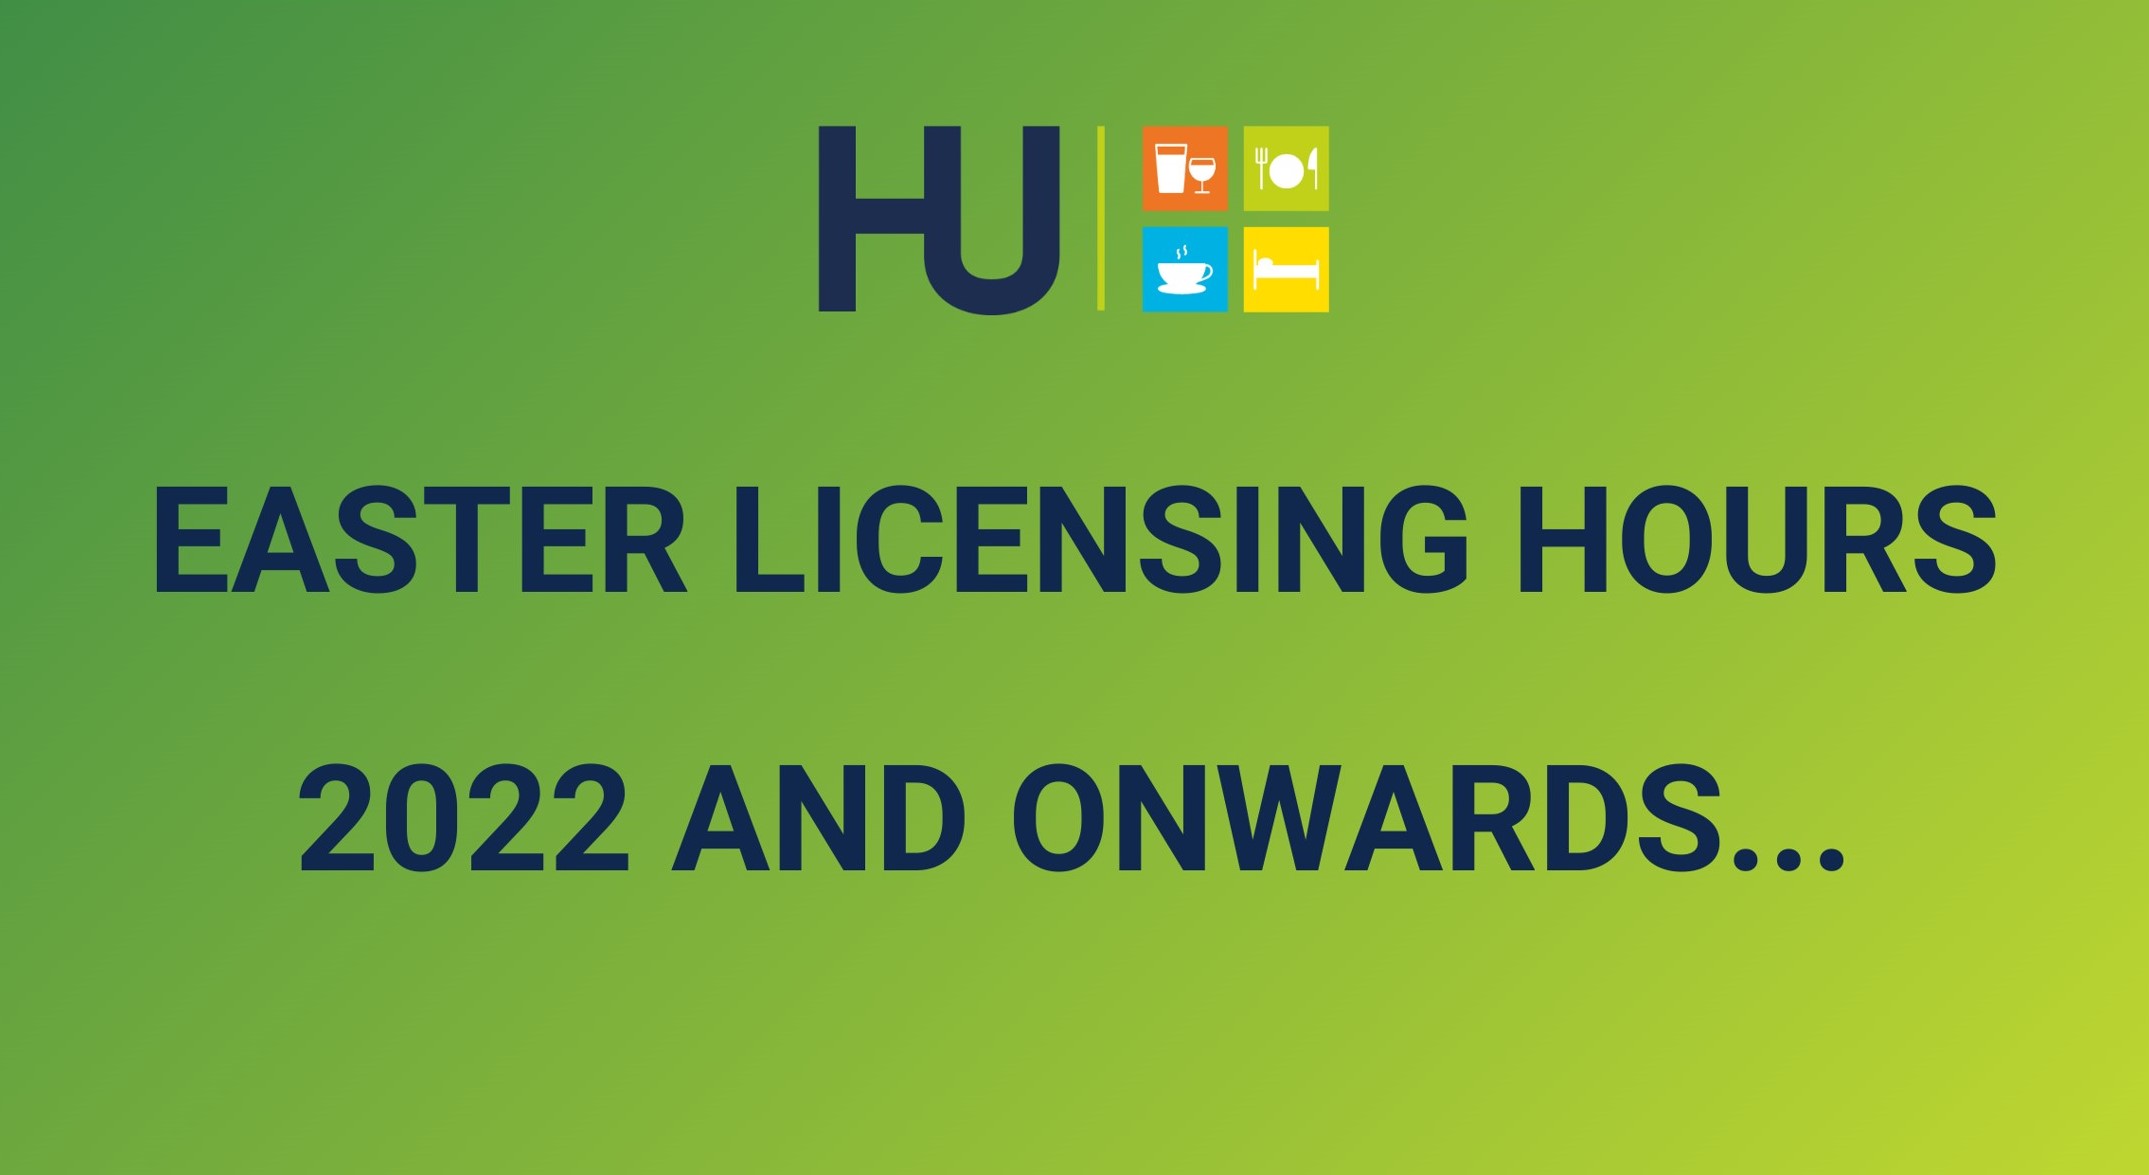 EASTER LICENSING HOURS 2022 AND ONWARDS